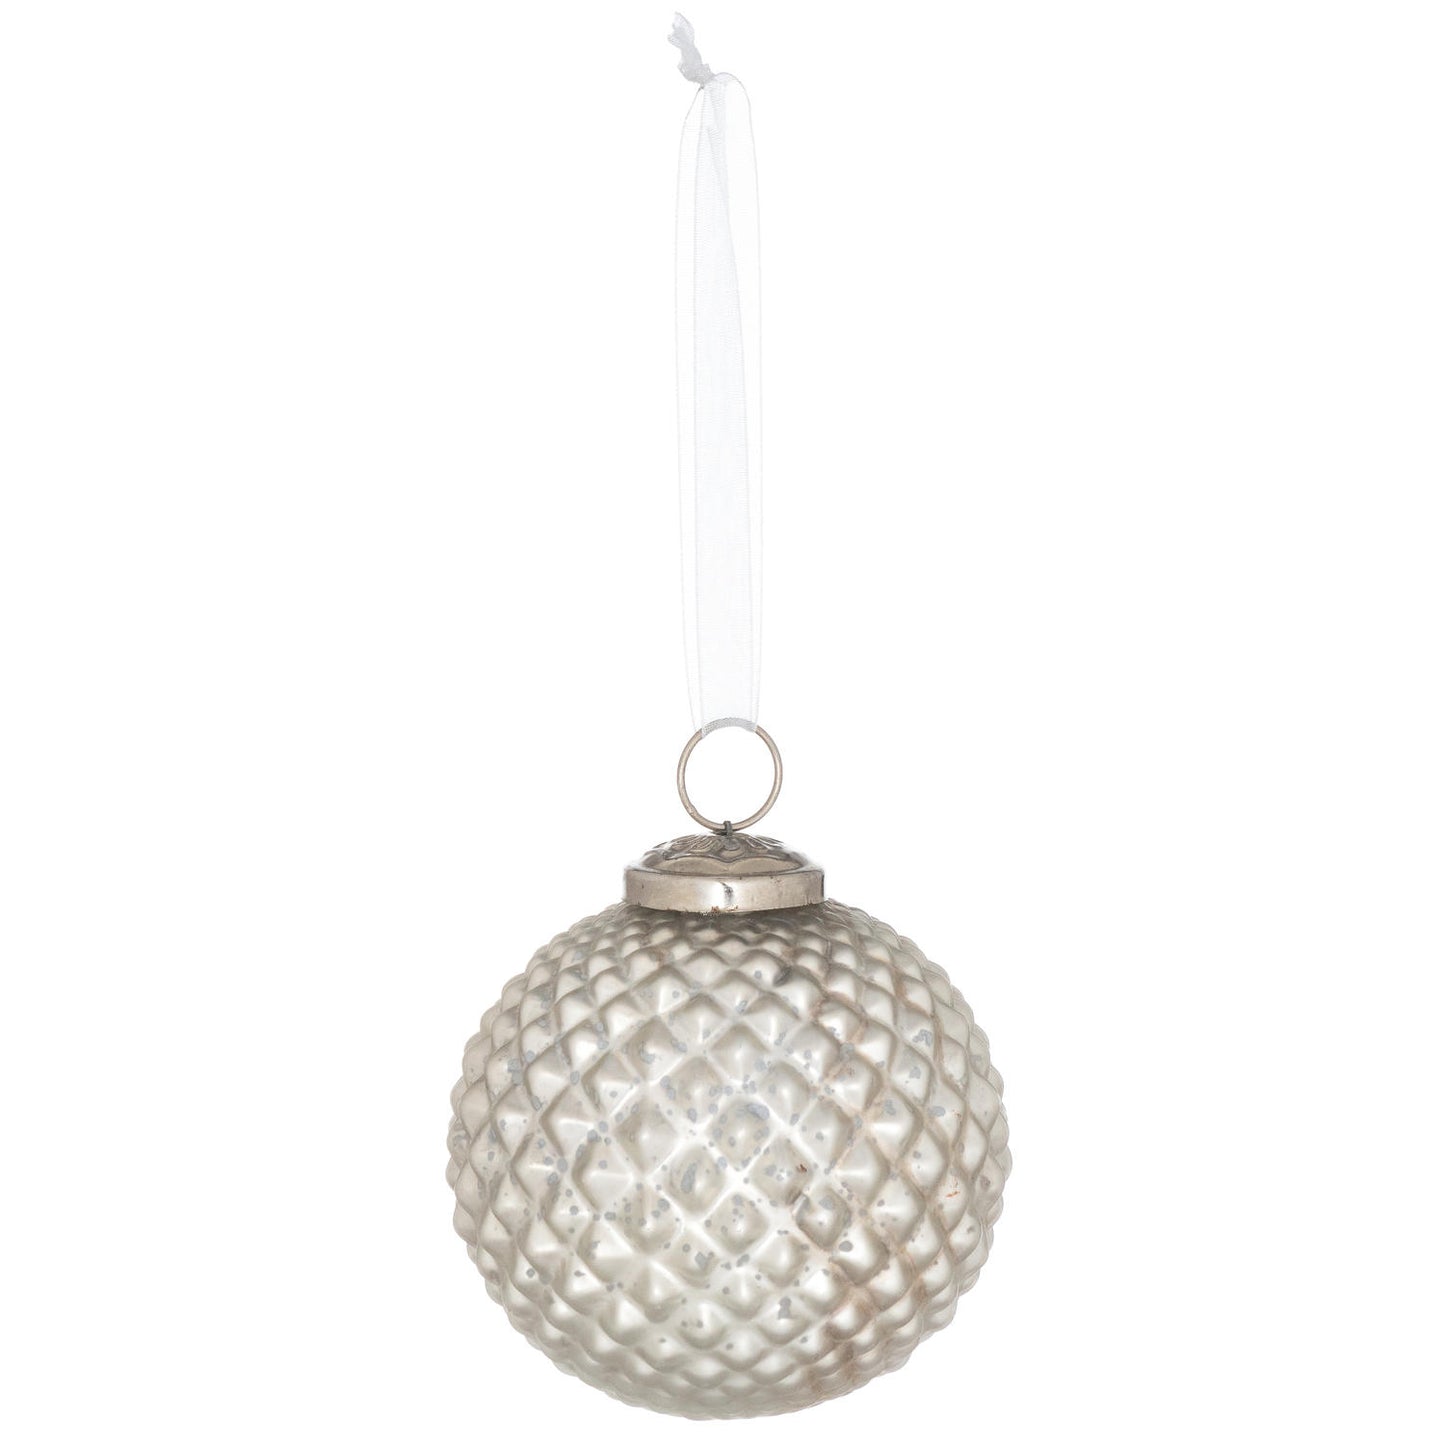 Set of Silver Honeycomb Hanging Baubles